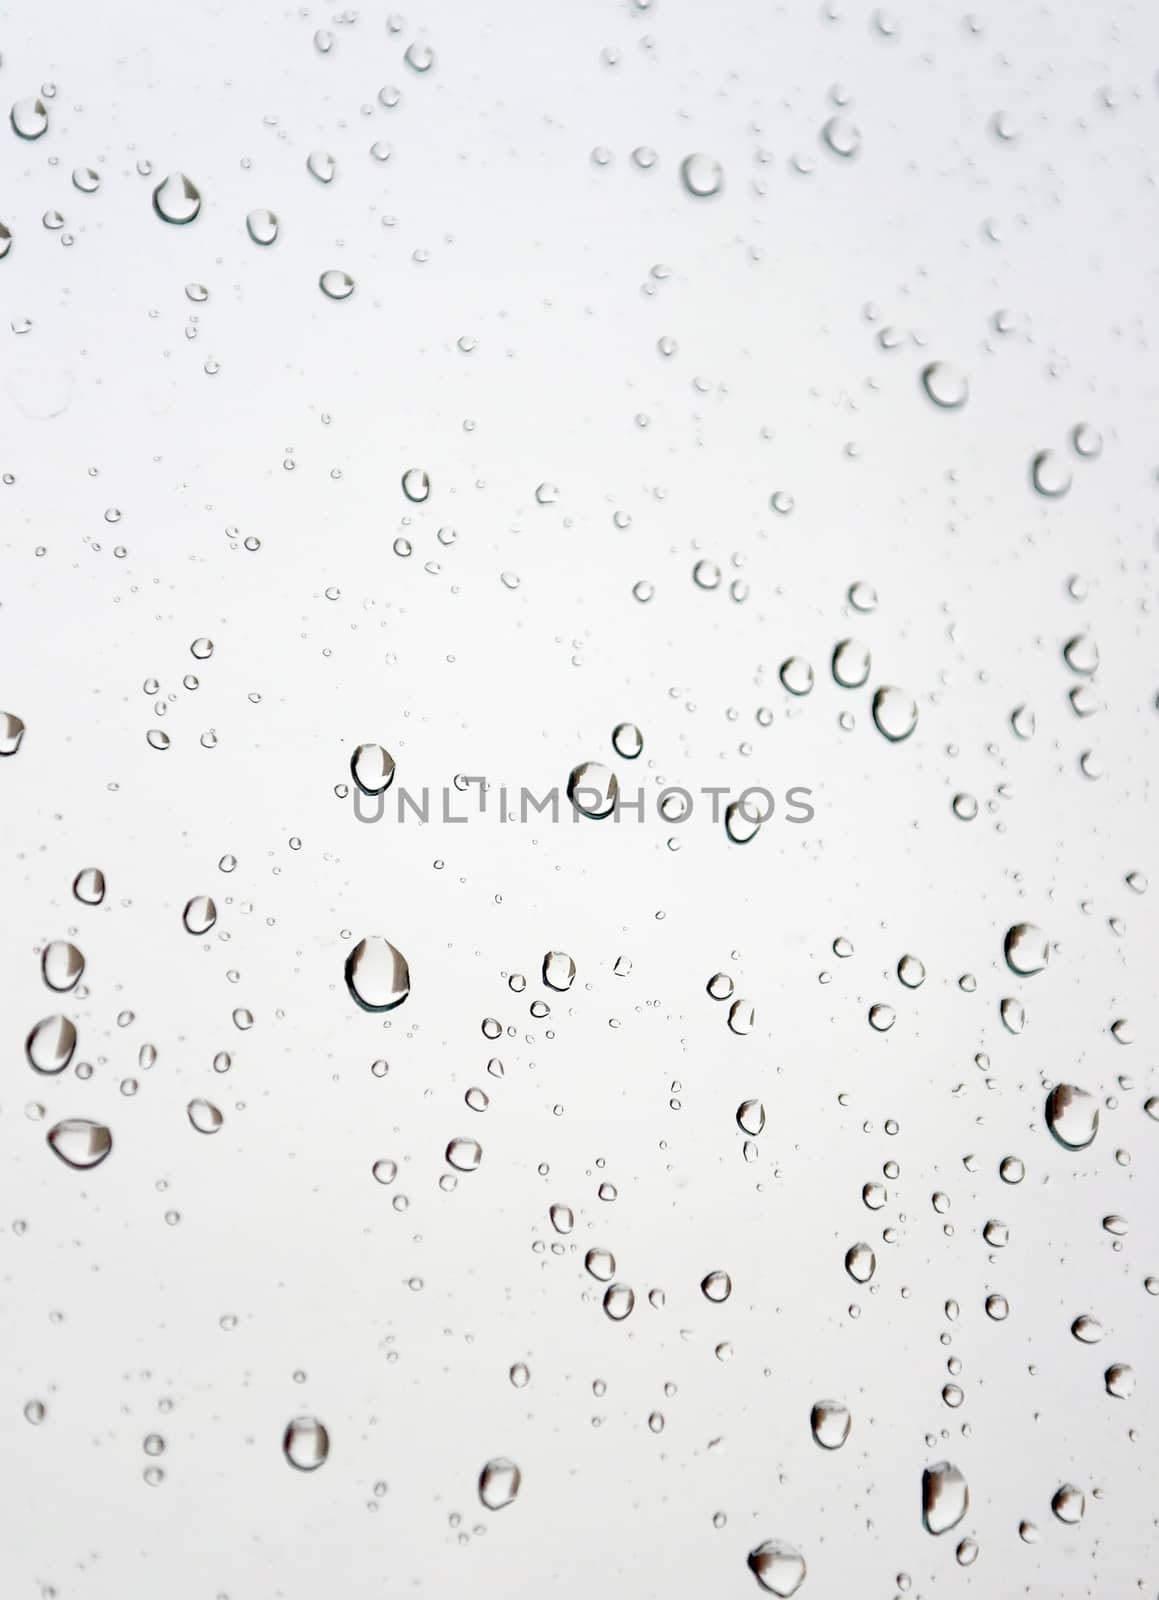 Water drops on the window. Abstract background. Shallow DOF.